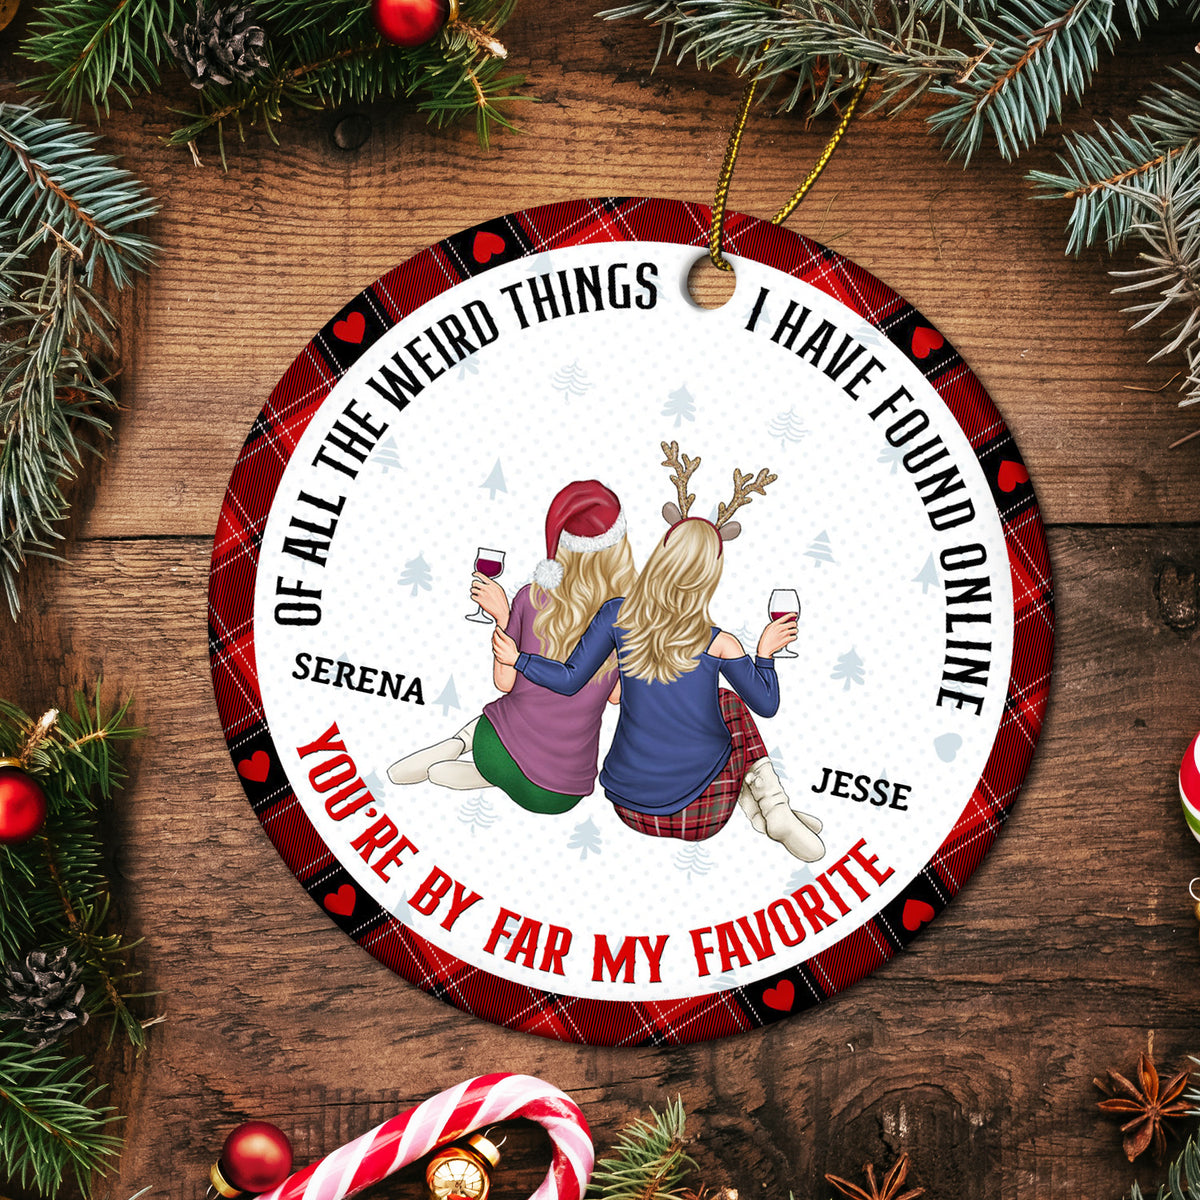 Of All The Weird Things - Loving, Christmas Gift For Couples, Husband, Wife - Personalized Circle Ceramic Ornament